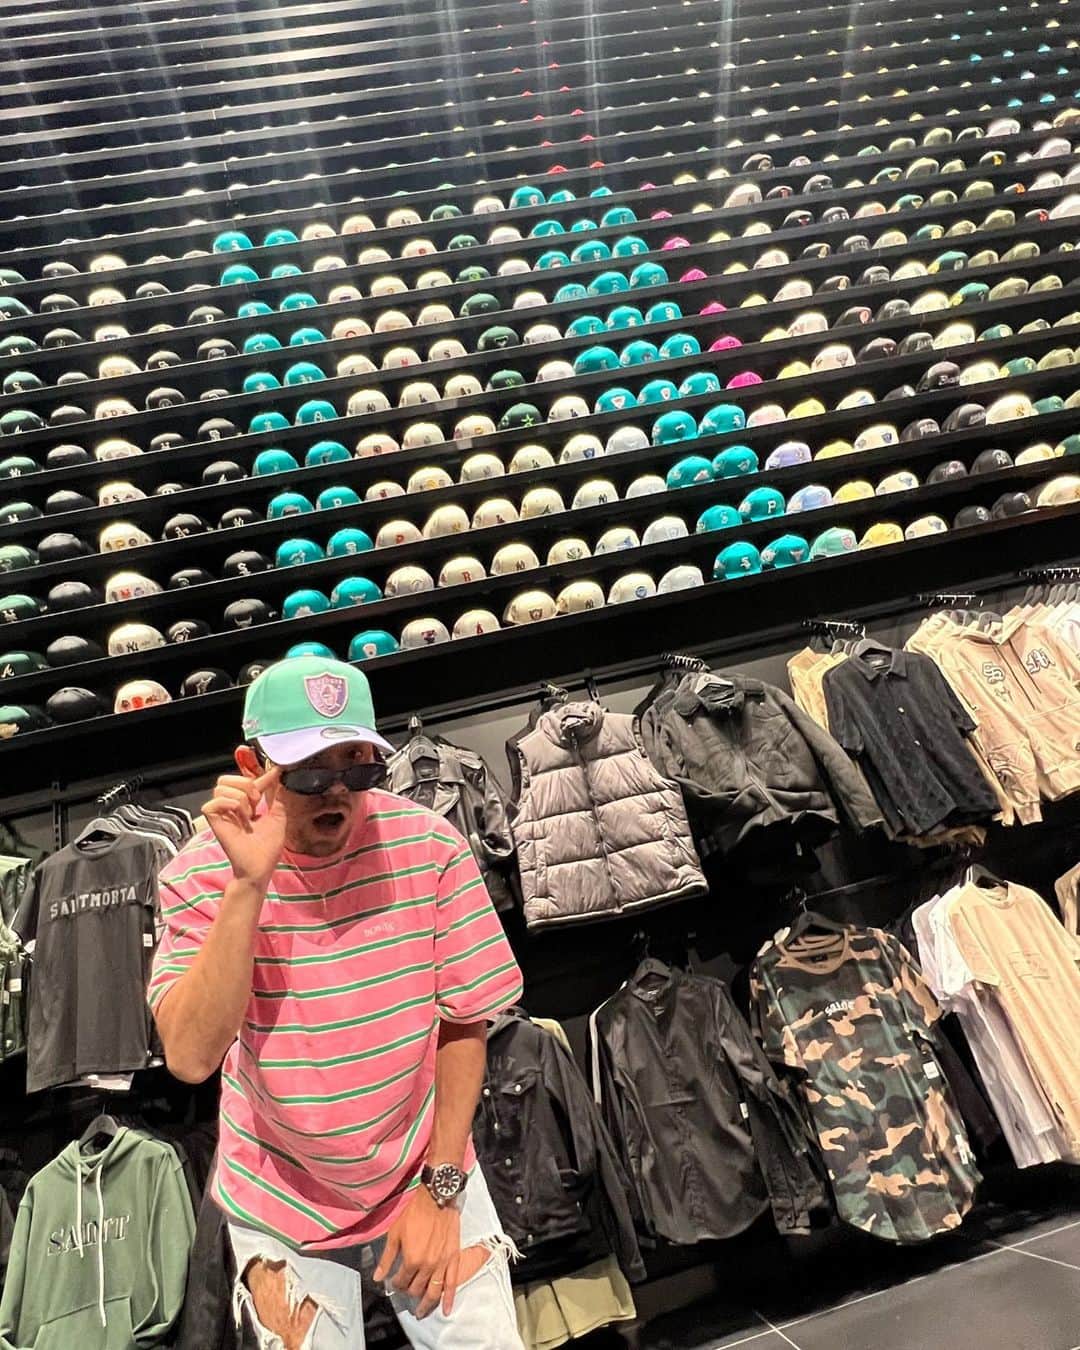 SONNYのインスタグラム：「Found a new spot to stop by in Vegas @culturekings , even got invited to a secret vip room in the back for the high rollers💵  新たなスポット開拓、裏にある秘密のVIPルームに招かれました。ベガスならではの粋な計らい😜  #lasvegas #culturekings #ラスベガス #ラスベガス生活」